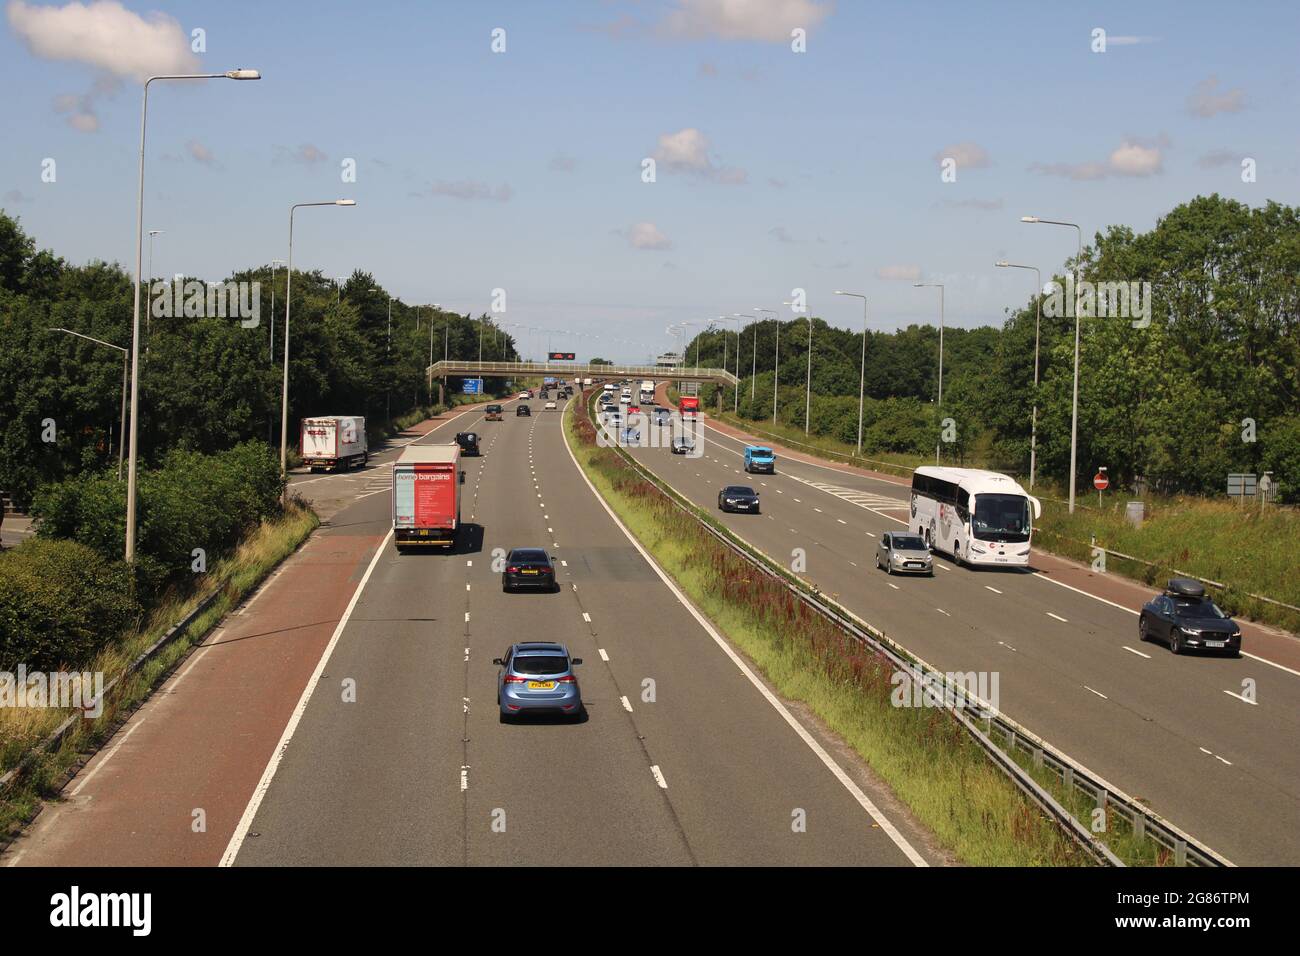 M6 motorway traffic with bright blue sky and bridge in distance Stock Photo